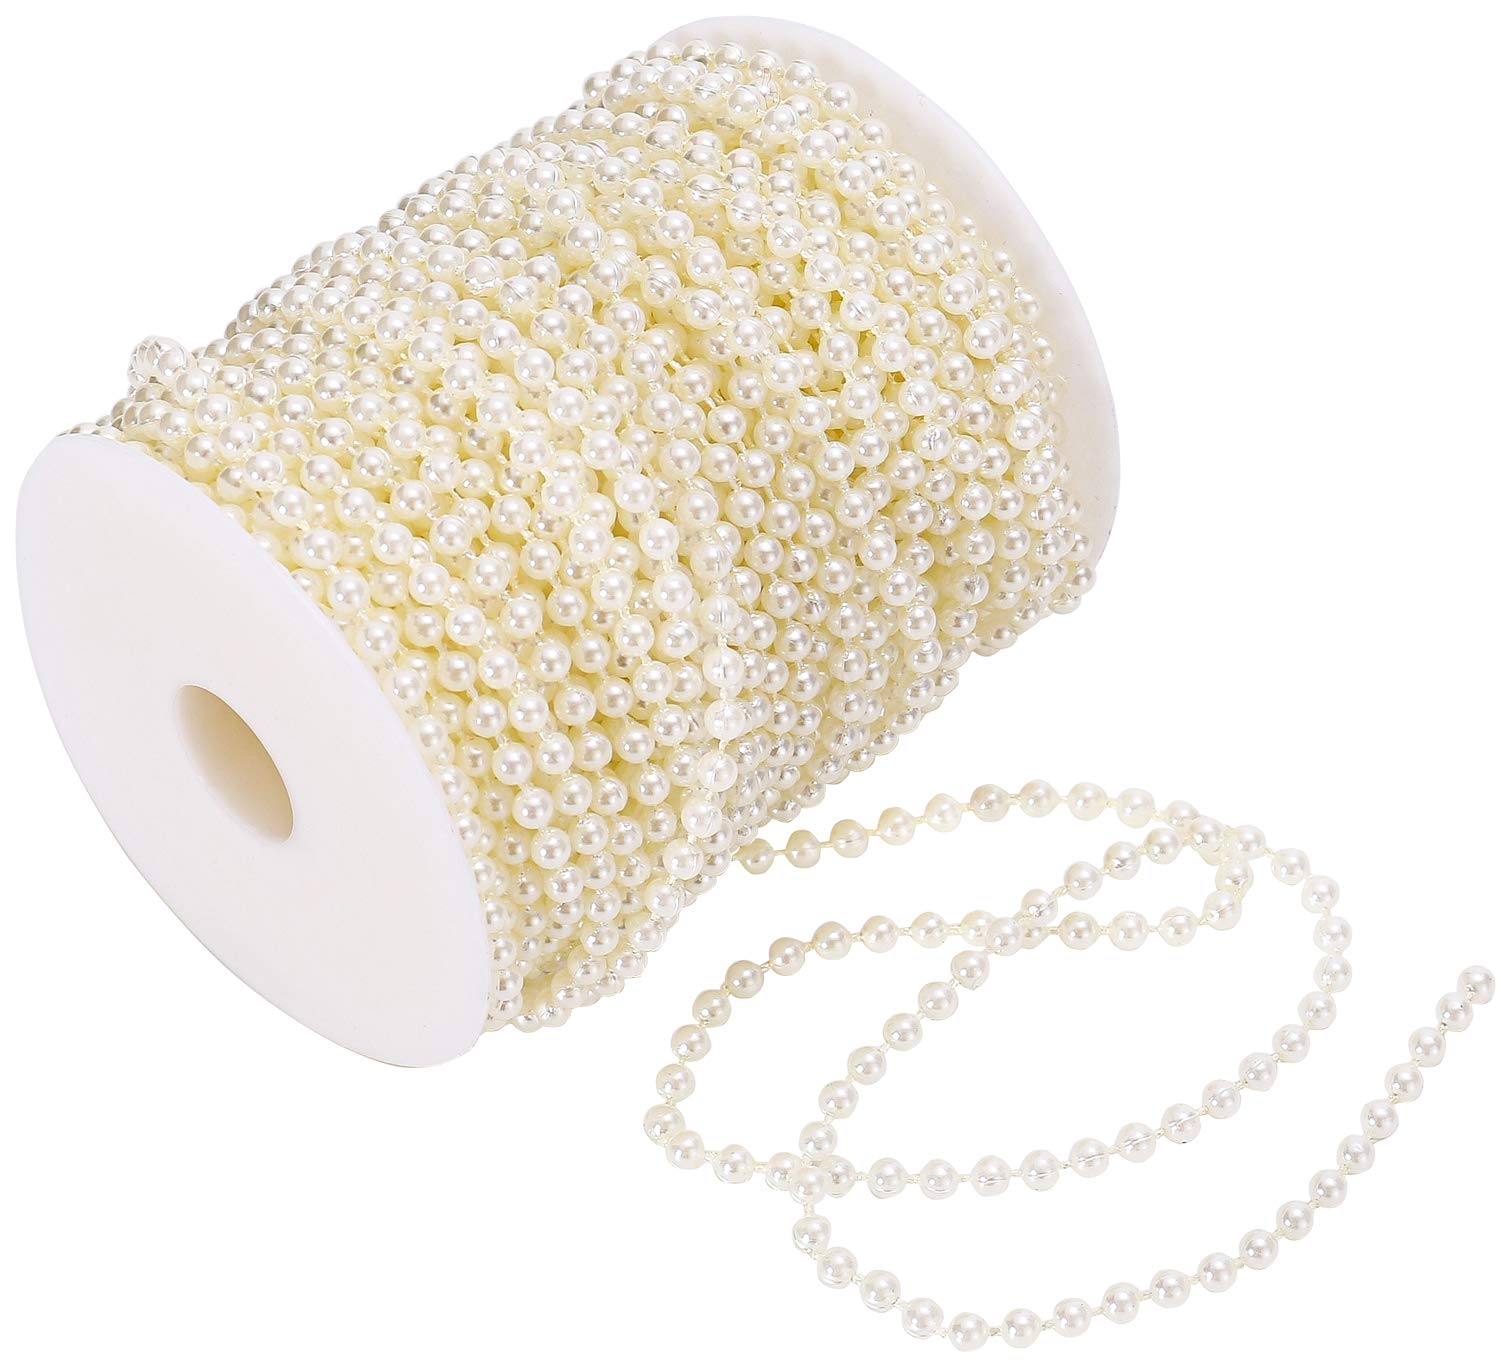 Sooyee 5mm Faux Pearl Beads Decorative Beads Garland Pearl Bead Roll Strand  for Wedding Party Decoration DIY Pearls for Crafts 108 Feet Roll Ivory